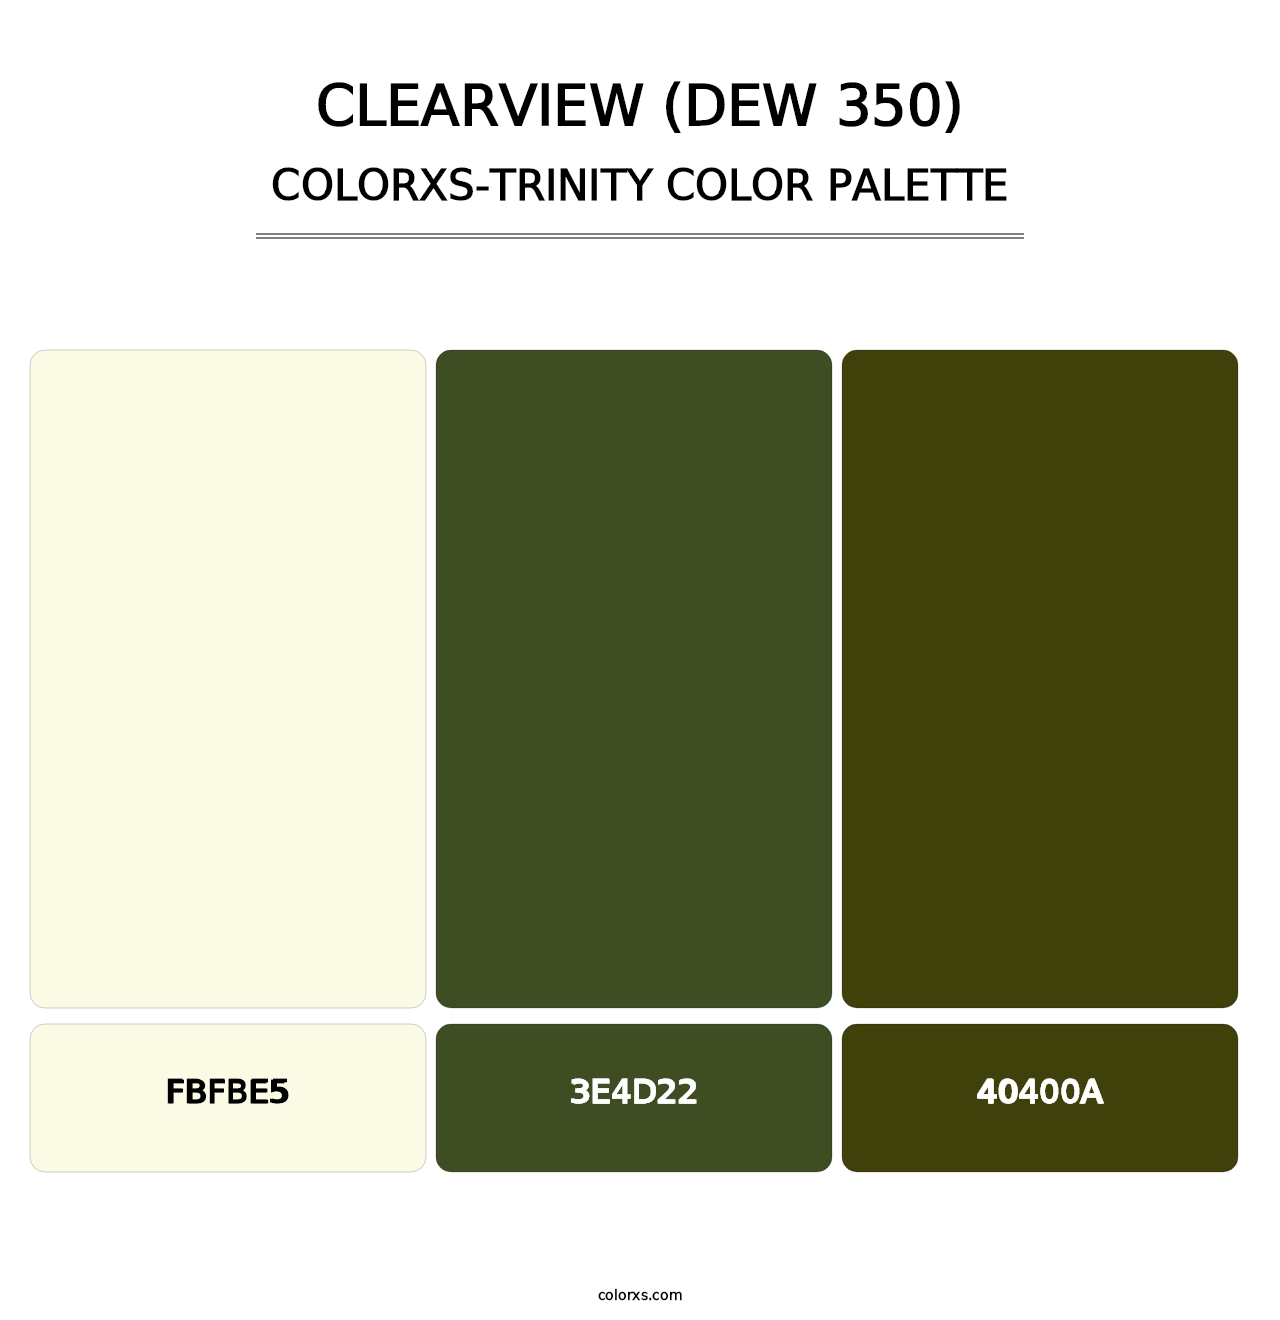 Clearview (DEW 350) - Colorxs Trinity Palette